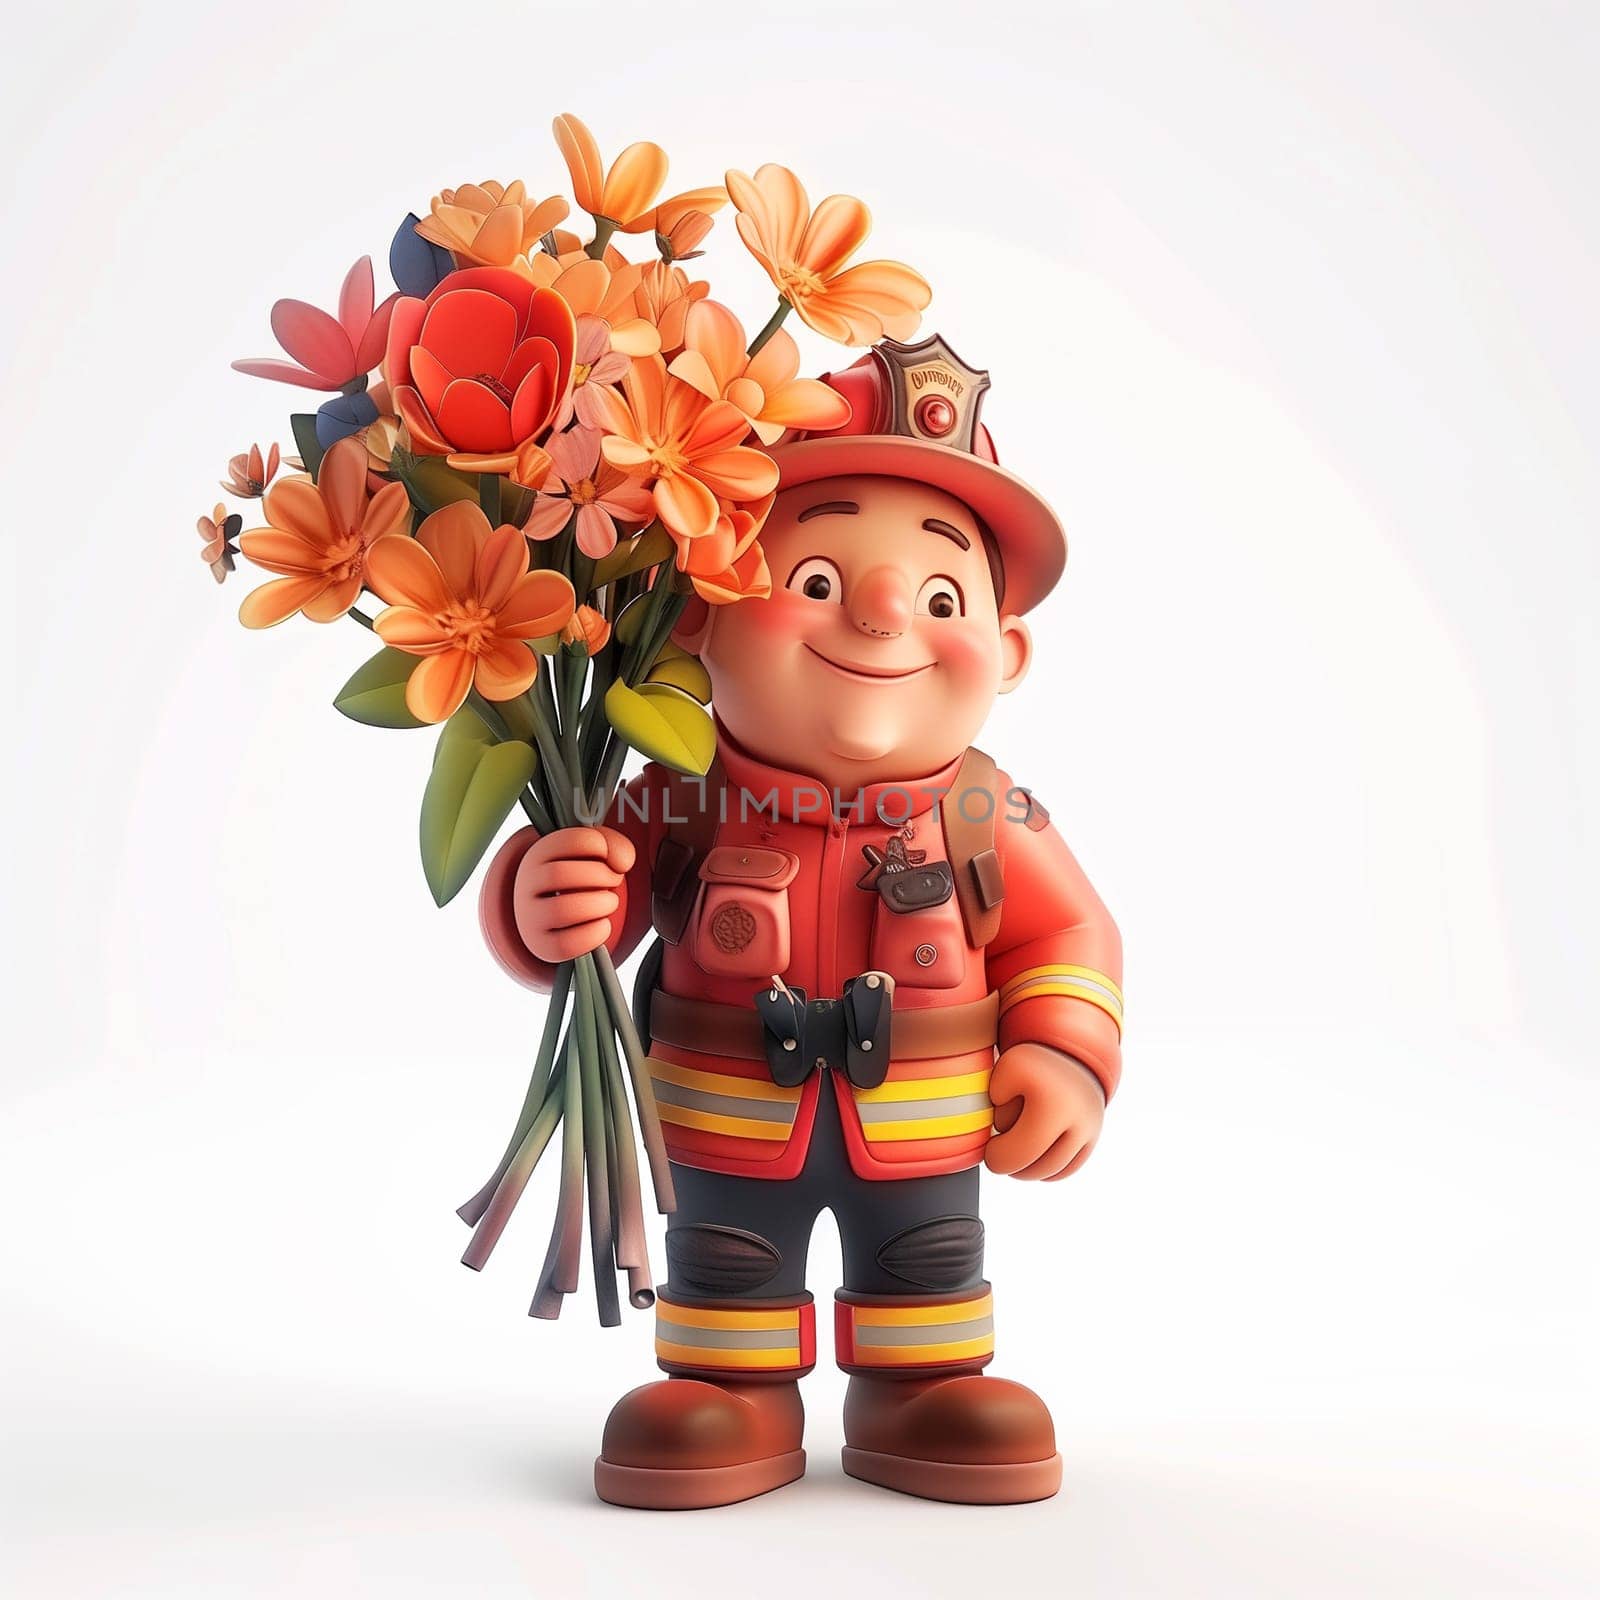 Fireman Figurine Holding Bouquet of Flowers by Sd28DimoN_1976